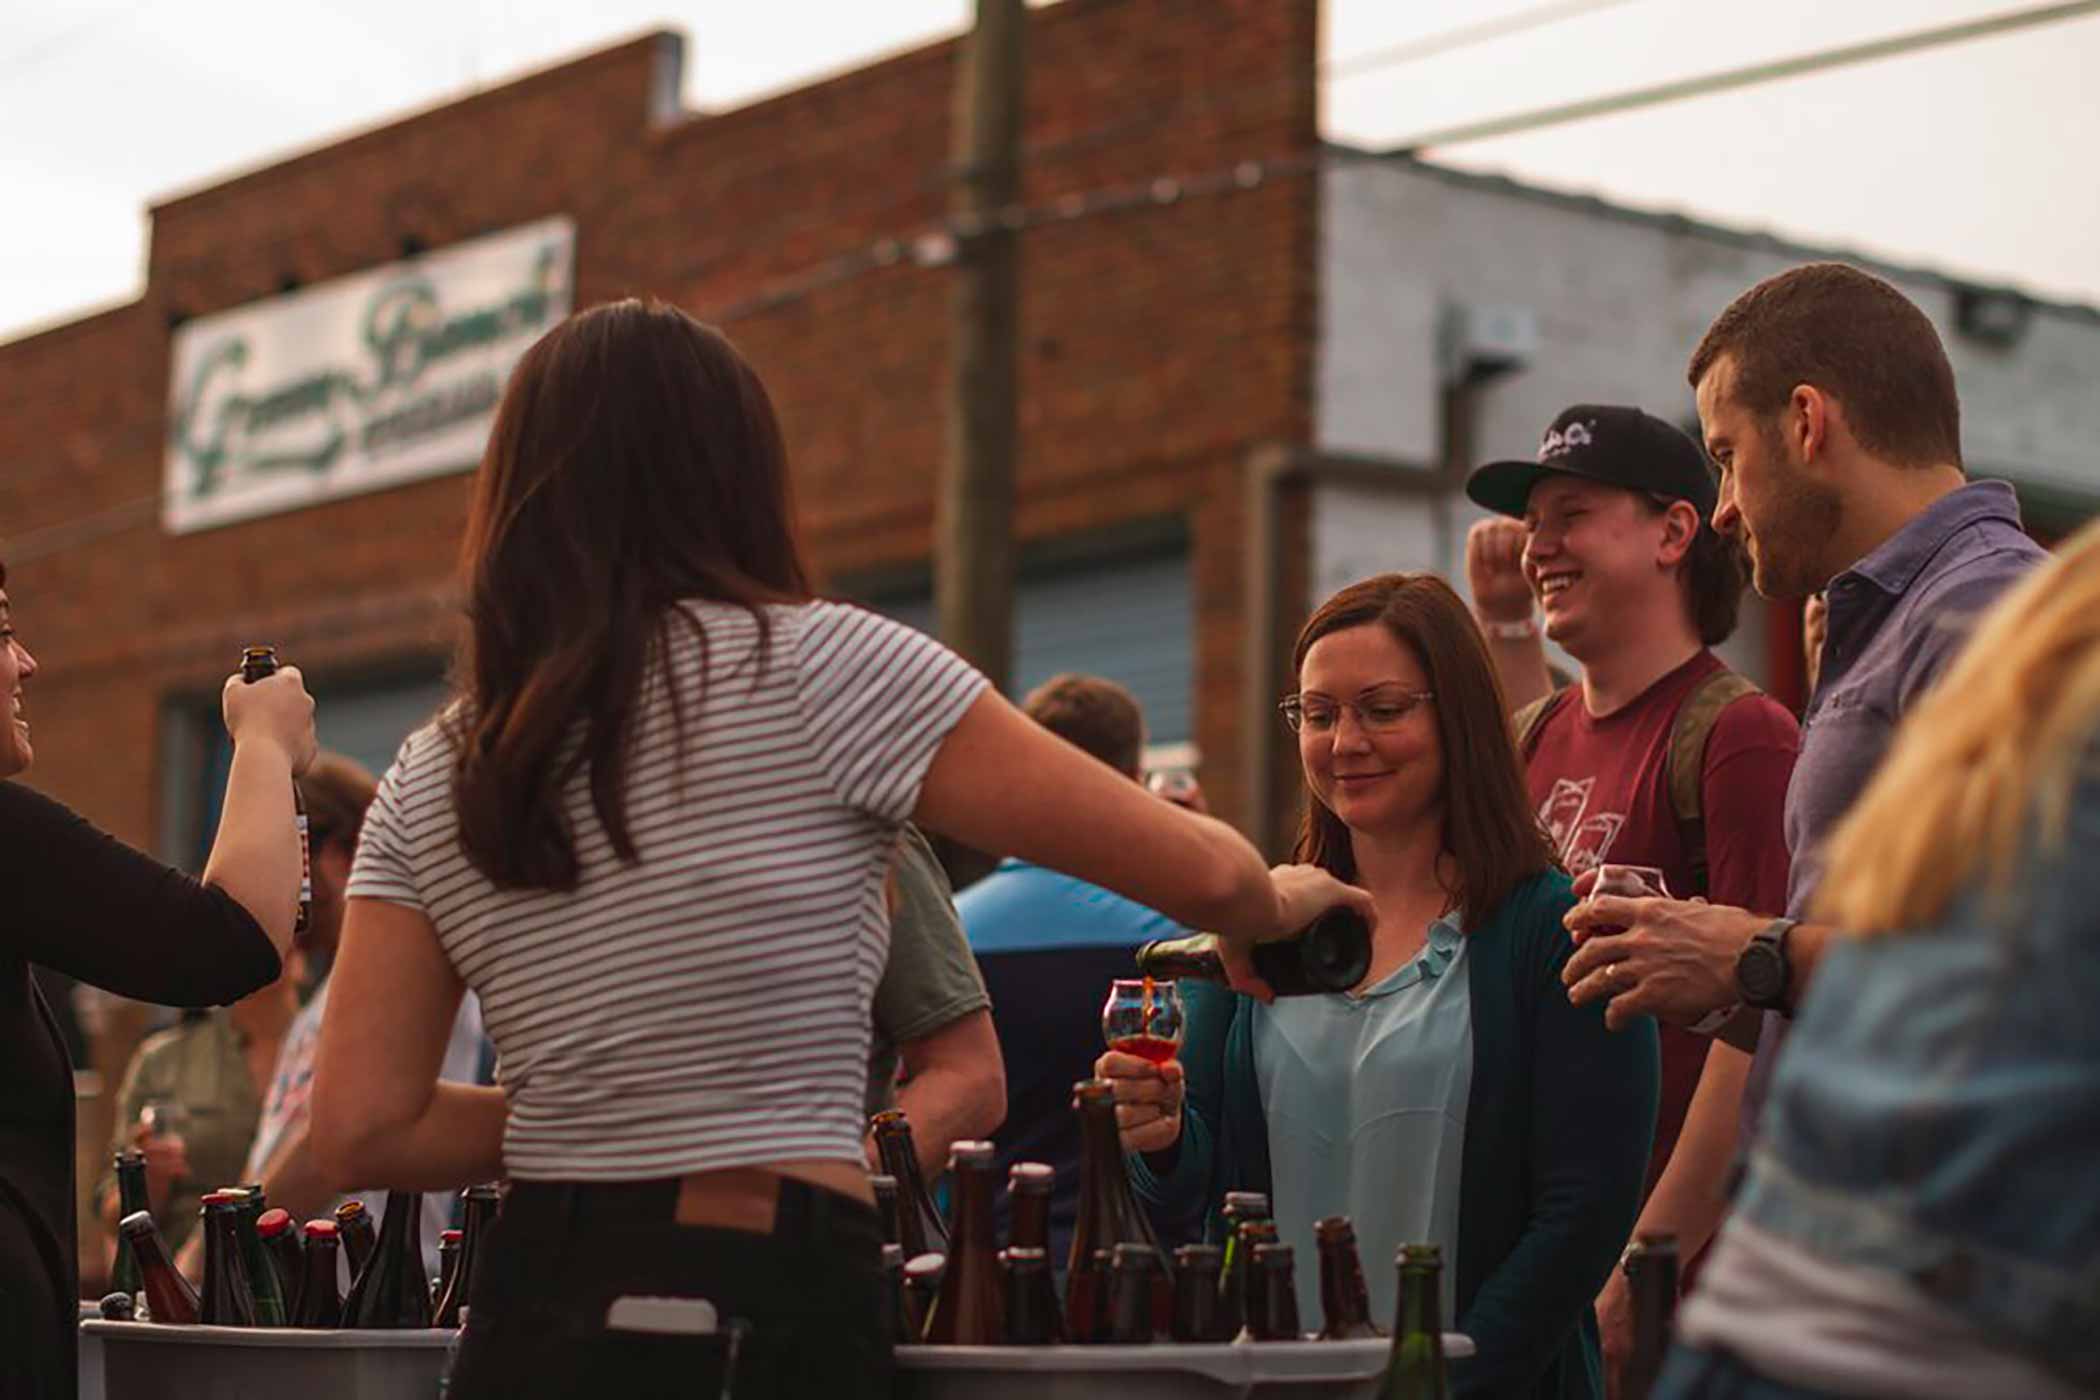 The 12 Best Beer Festivals You Can’t Miss This Year